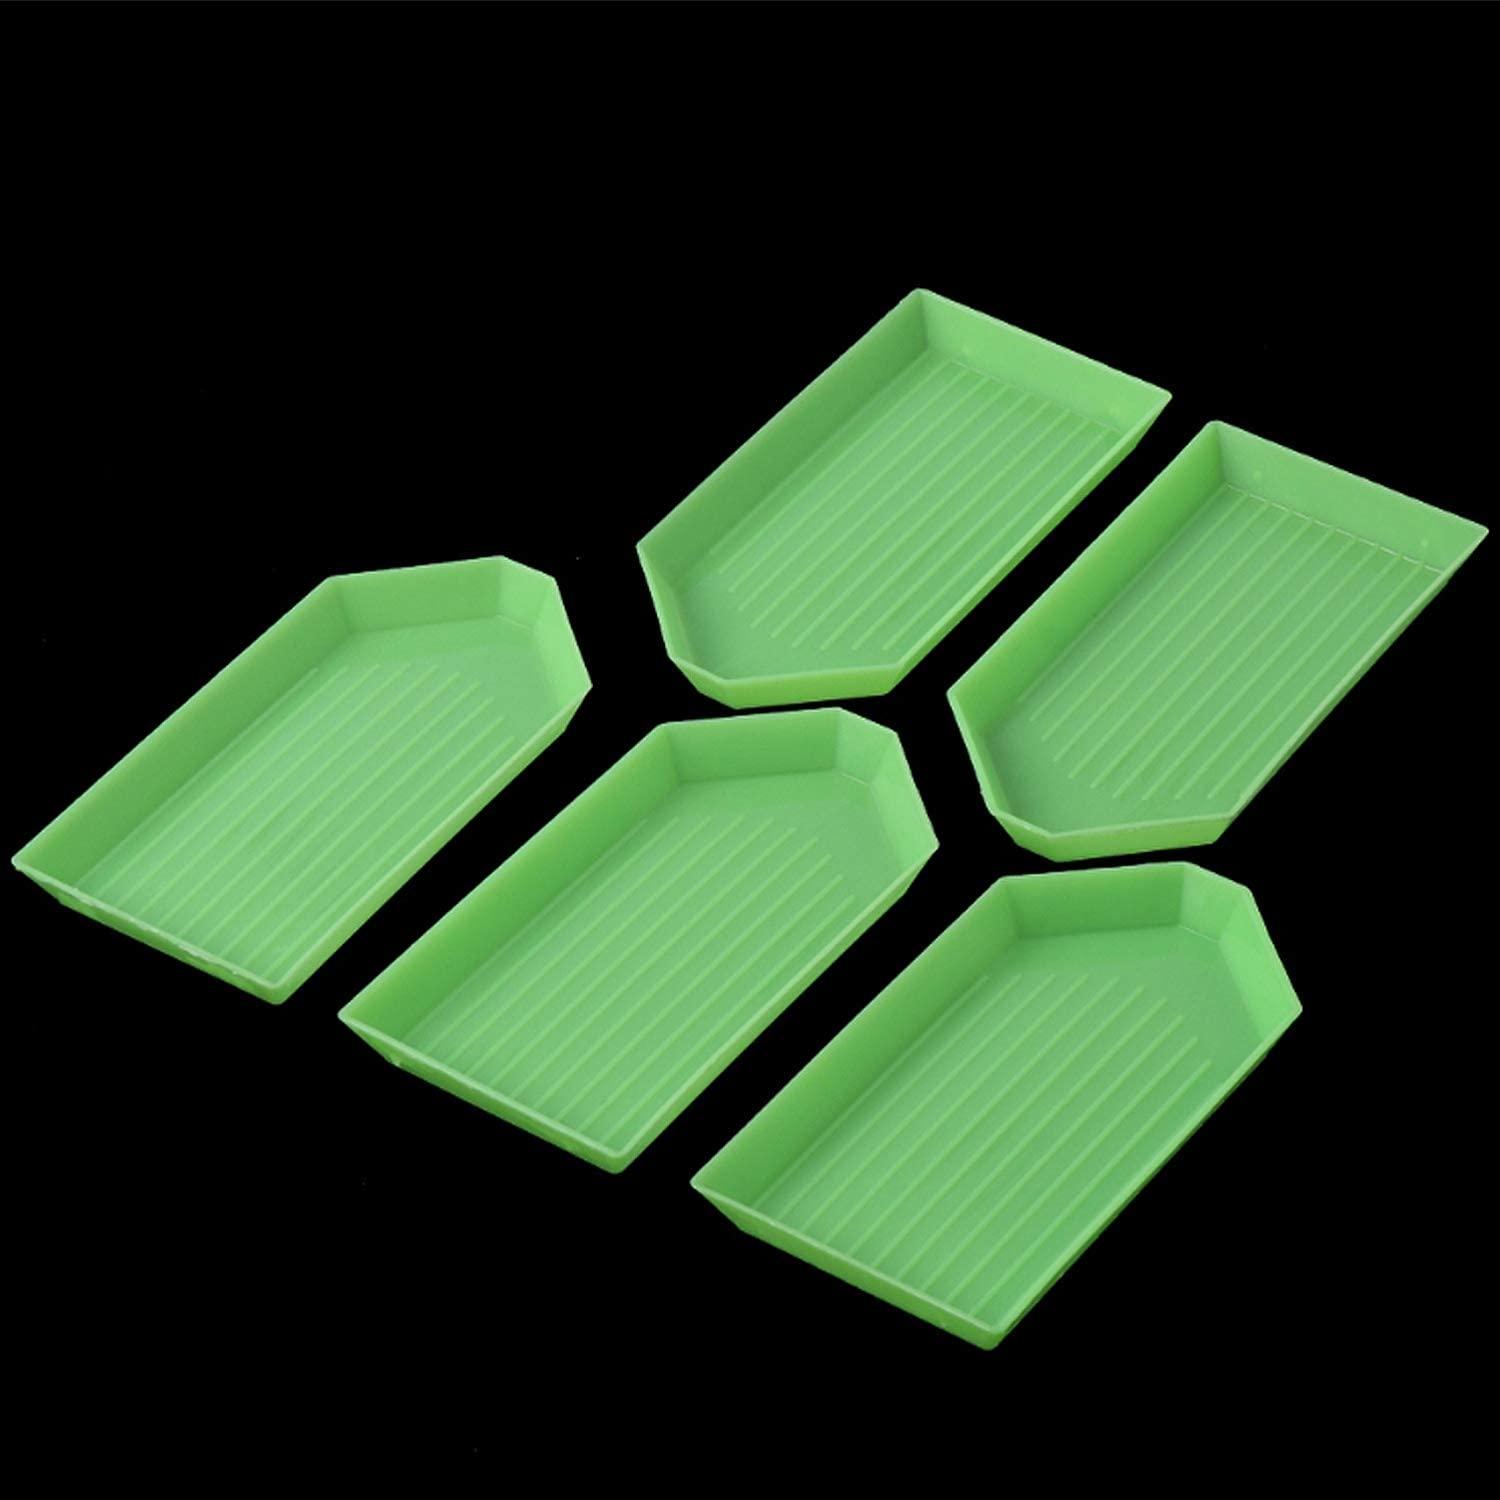 6 Pcs Diamond Painting Trays Large and Small,Plastic Bead Sorting